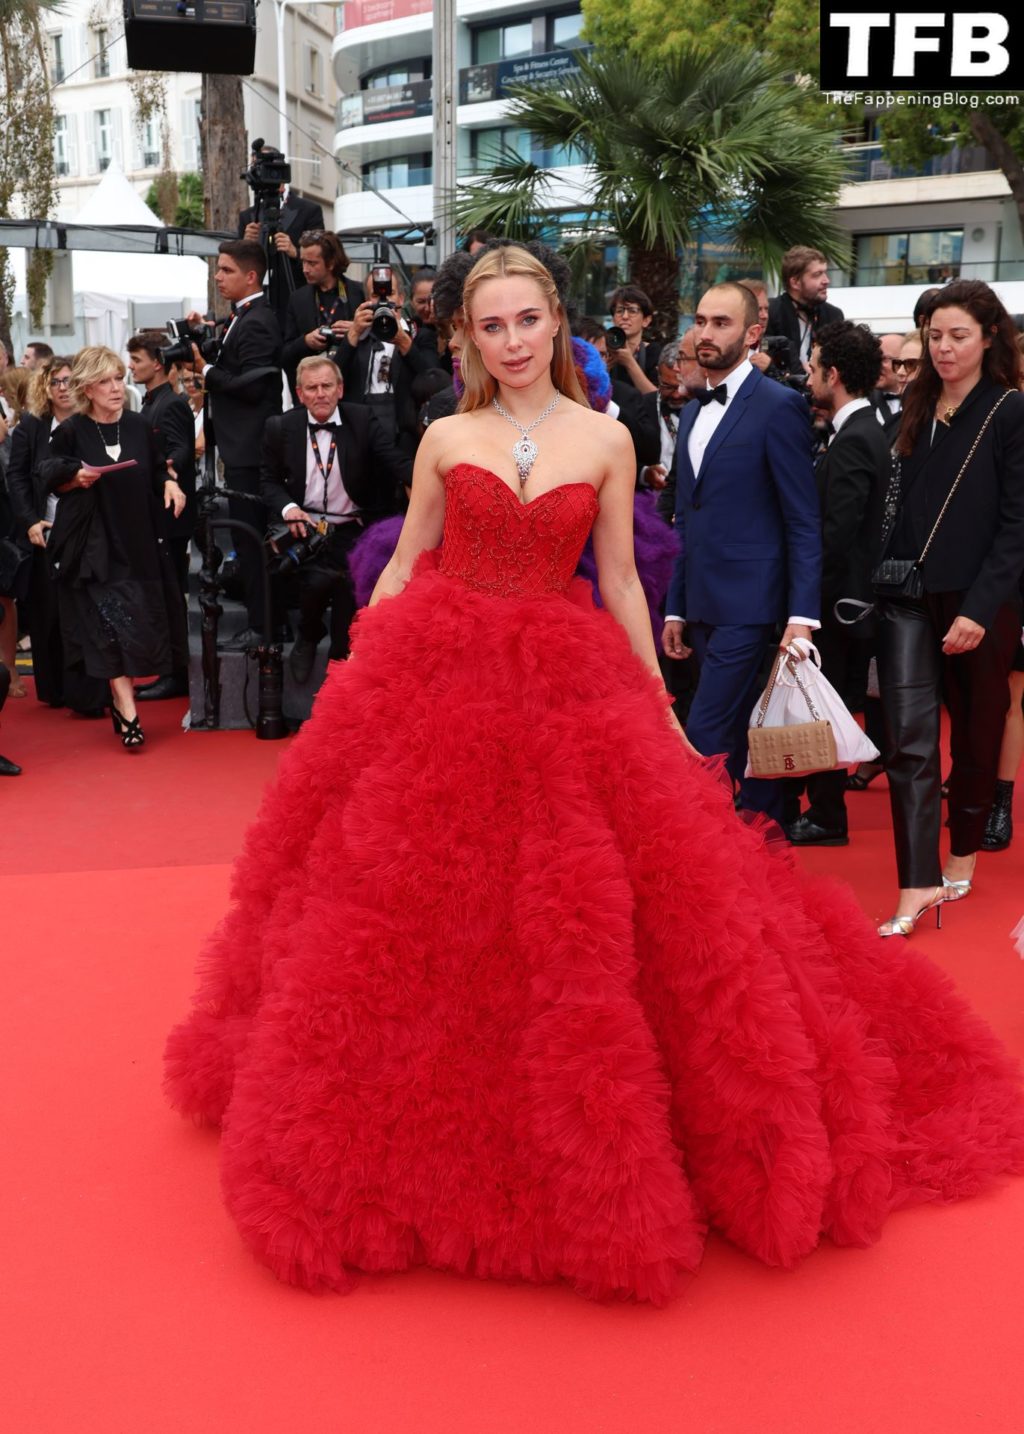 Kimberley Garner Sexy The Fappening Blog 67 1024x1434 - Kimberley Garner Looks Hot in a Red Dress at the 75th Annual Cannes Film Festival (134 Photos)